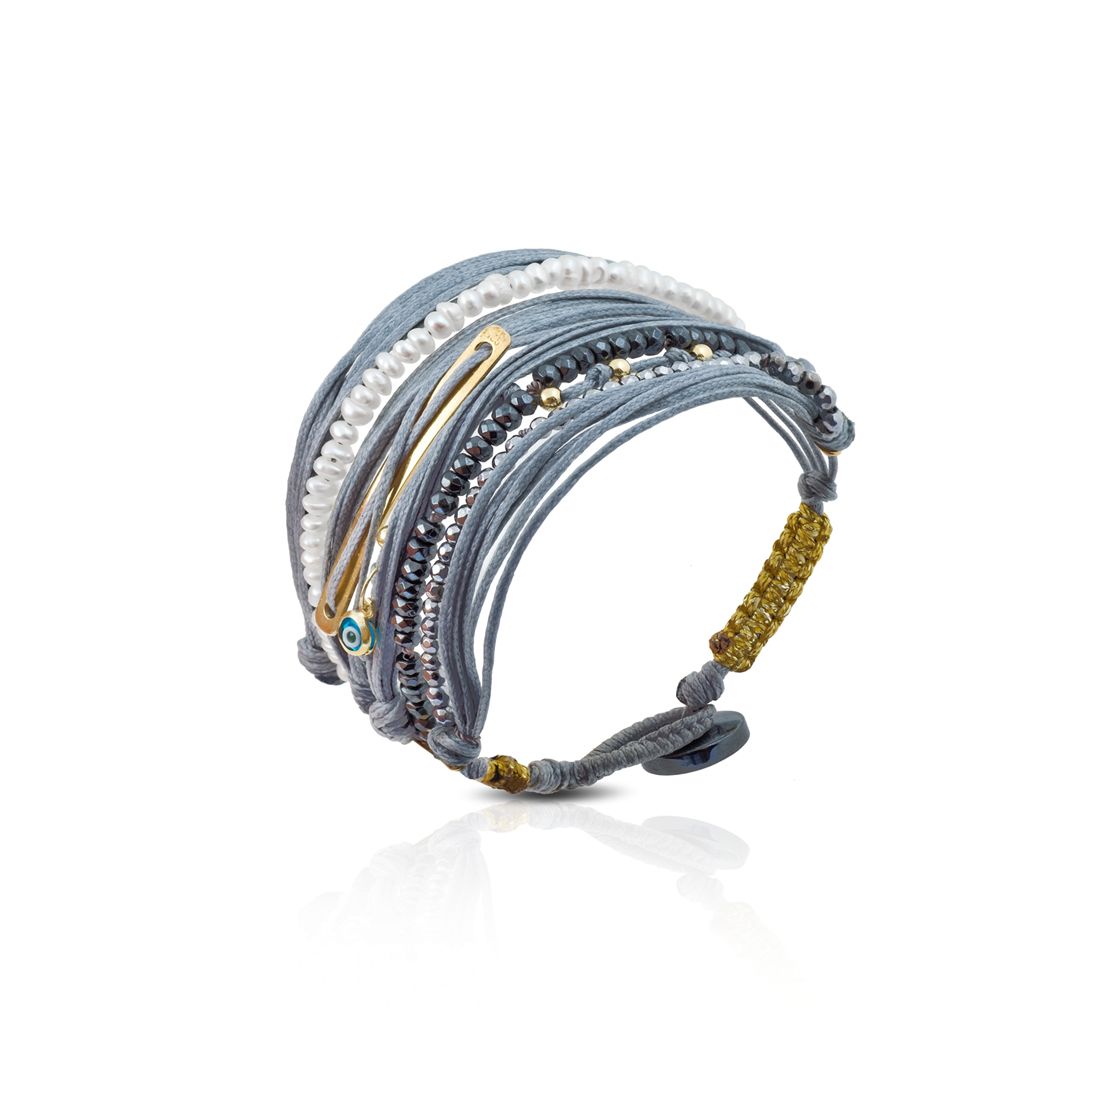 Gold bar bracelet with grey cord and semi-precious stones hand-knotted with thread and button closure.